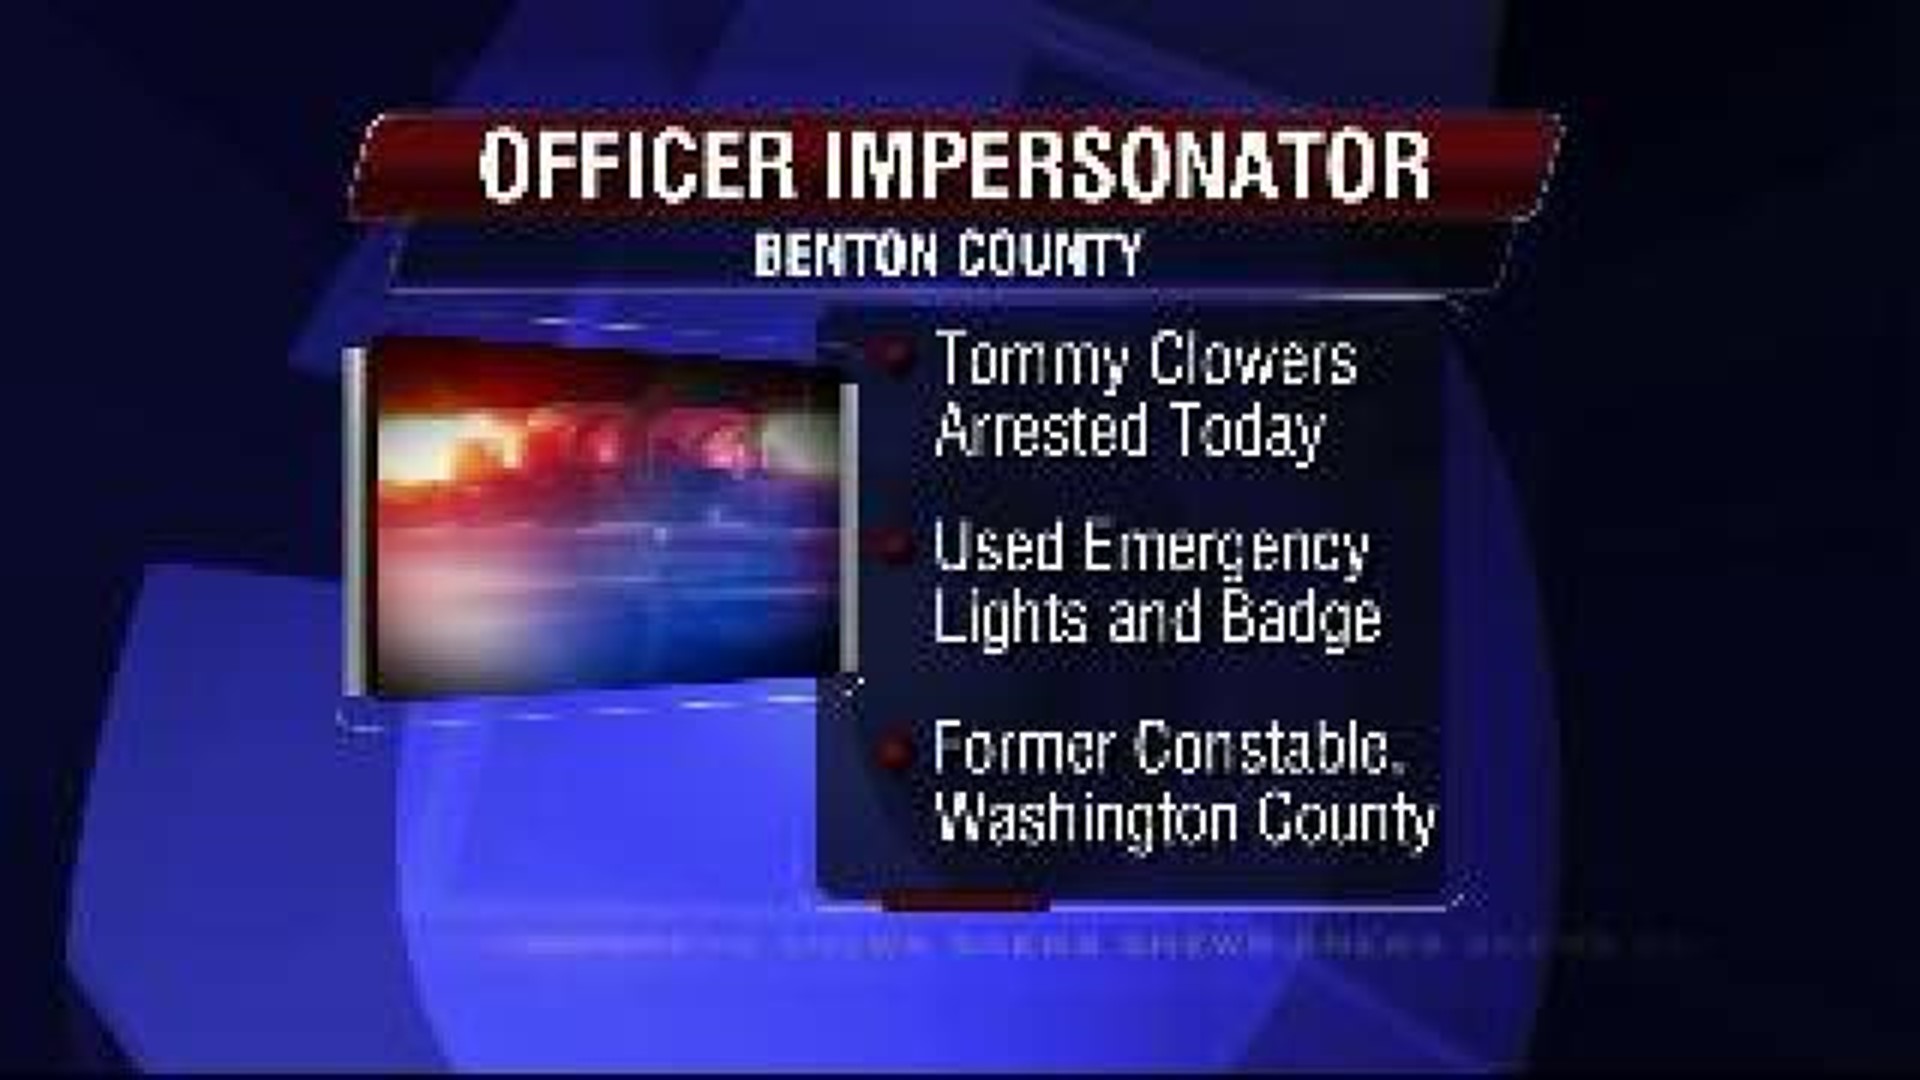 Former Constable Suspected Of Impersonating An Officer